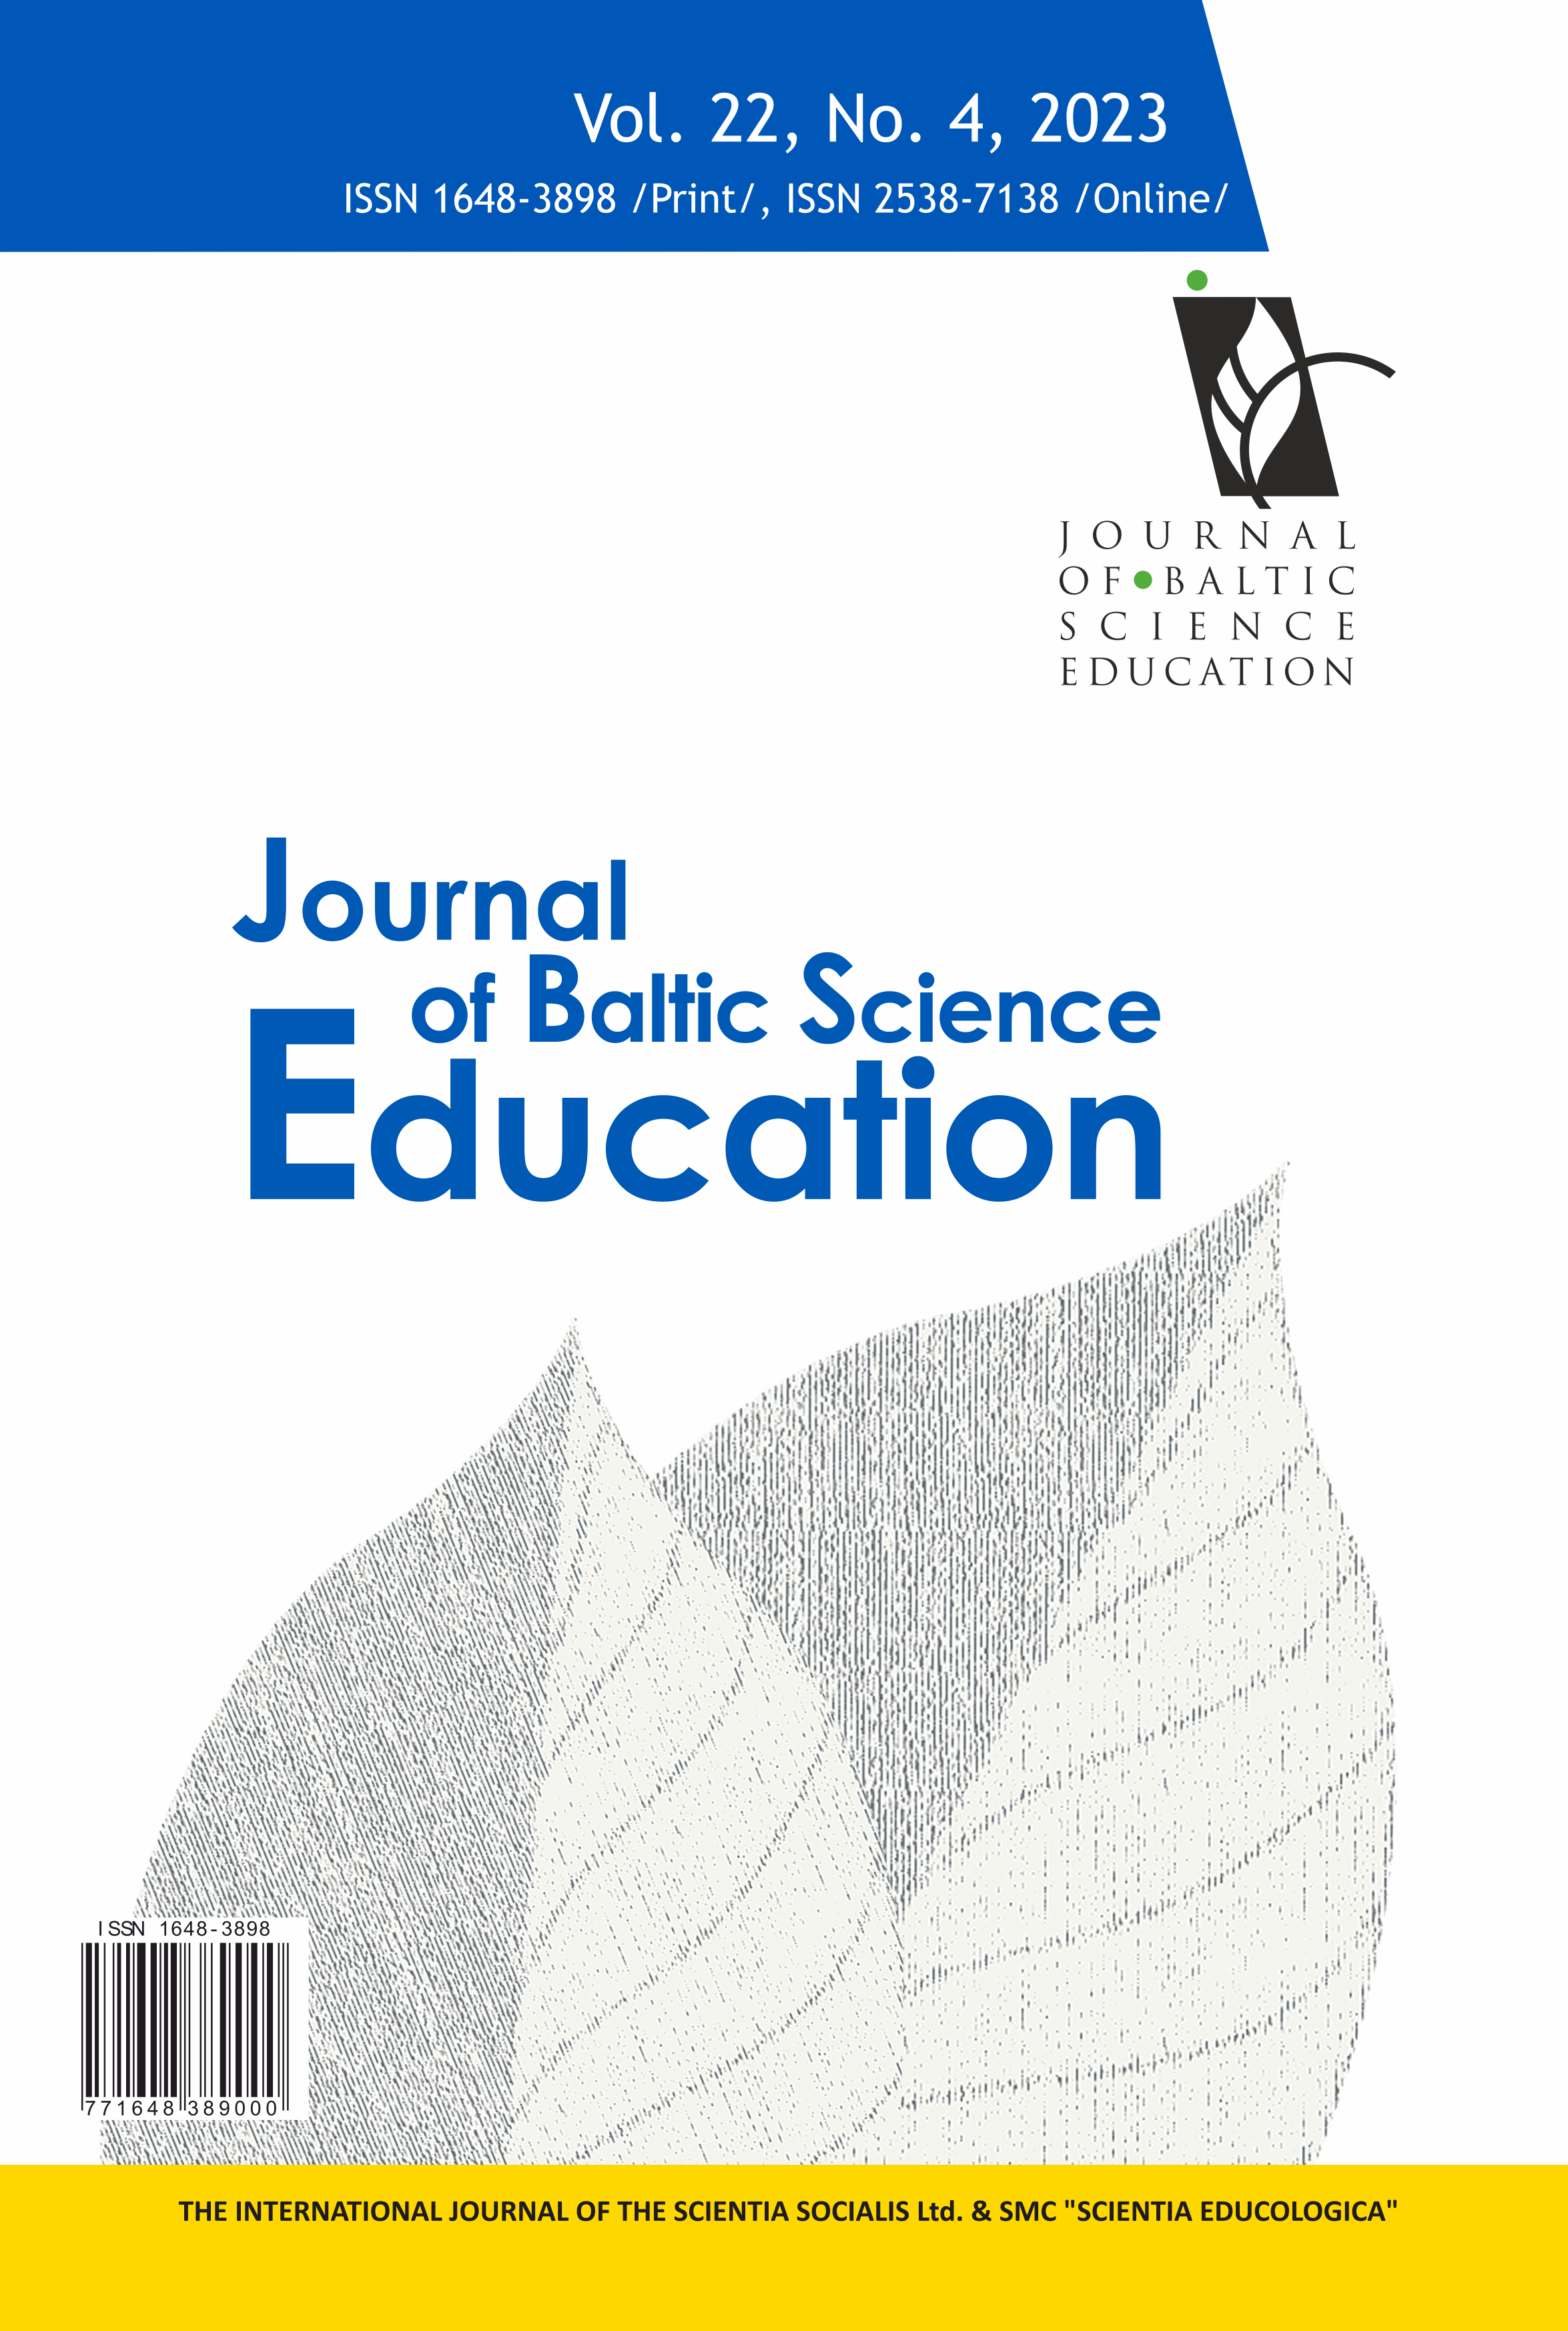 THE EFFECTS OF EXTENDED REALITY TECHNOLOGIES IN STEM EDUCATION ON STUDENTS’ LEARNING RESPONSE AND PERFORMANCE